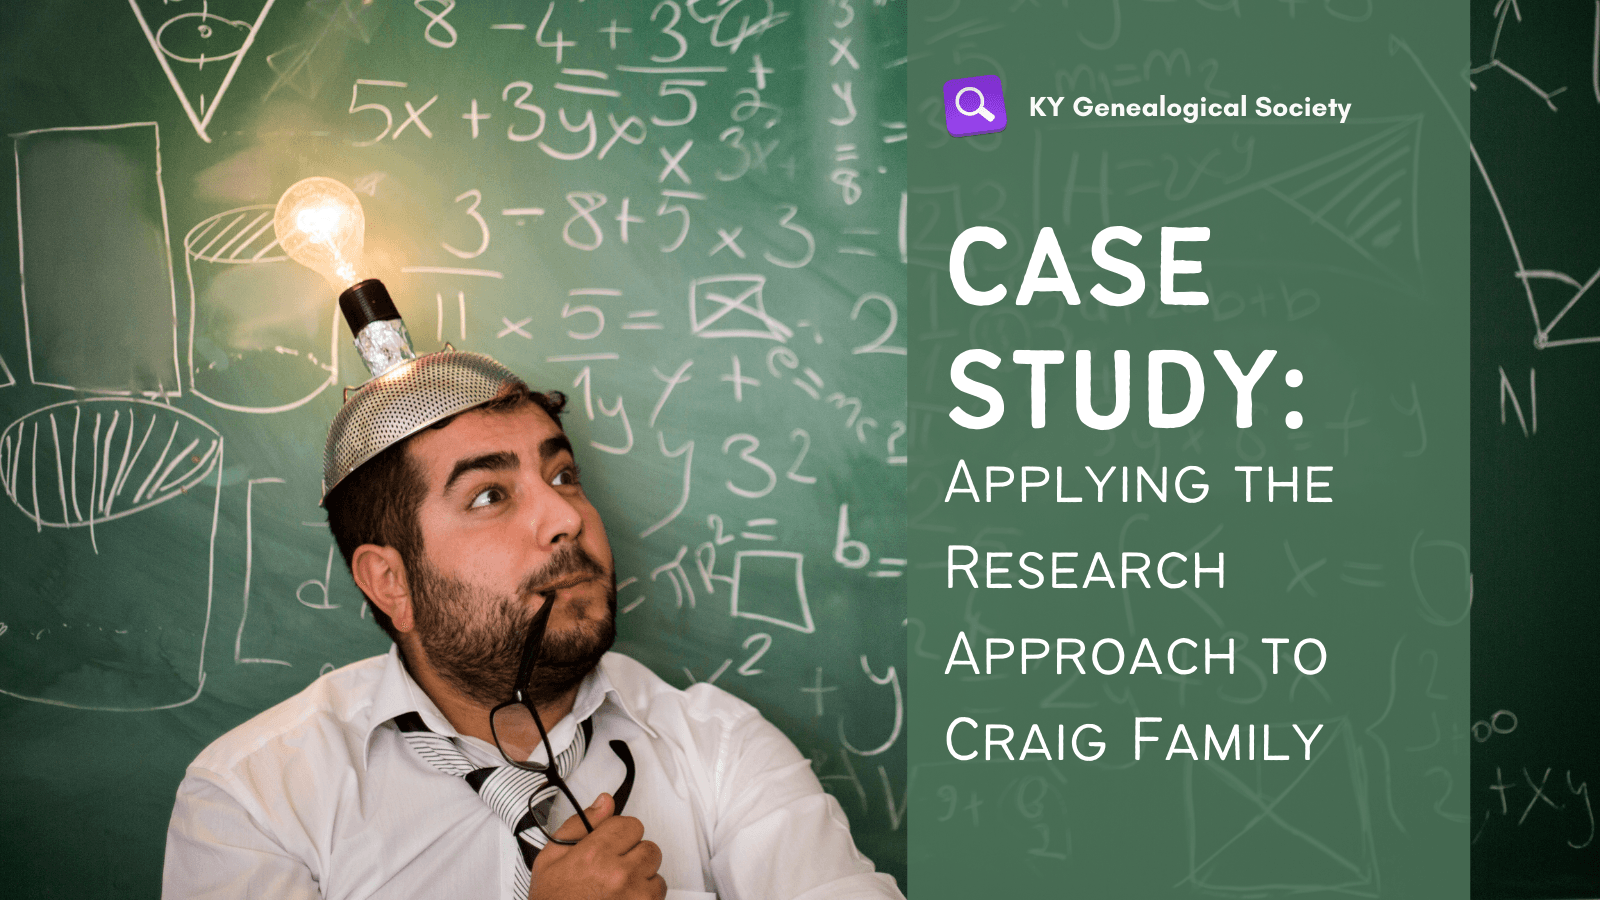 Case Study: Applying the Research Approach to Craig Family